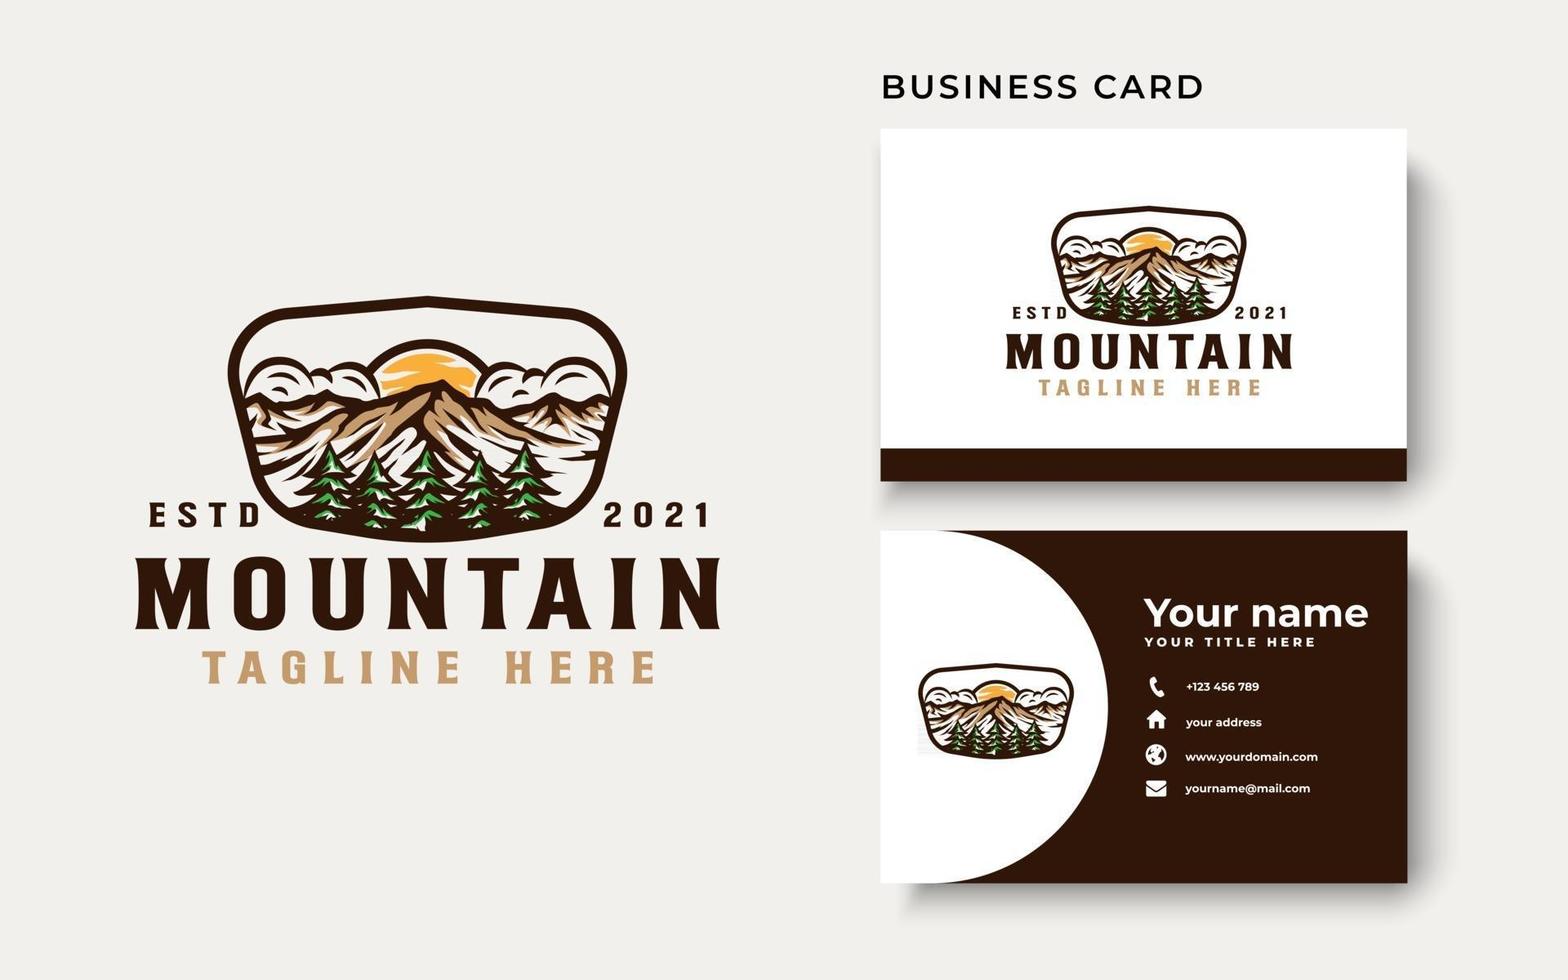 Mountain Adventure and Outdoor Vintage Logo Template. Badge or Emblem Style. Vector Illustration